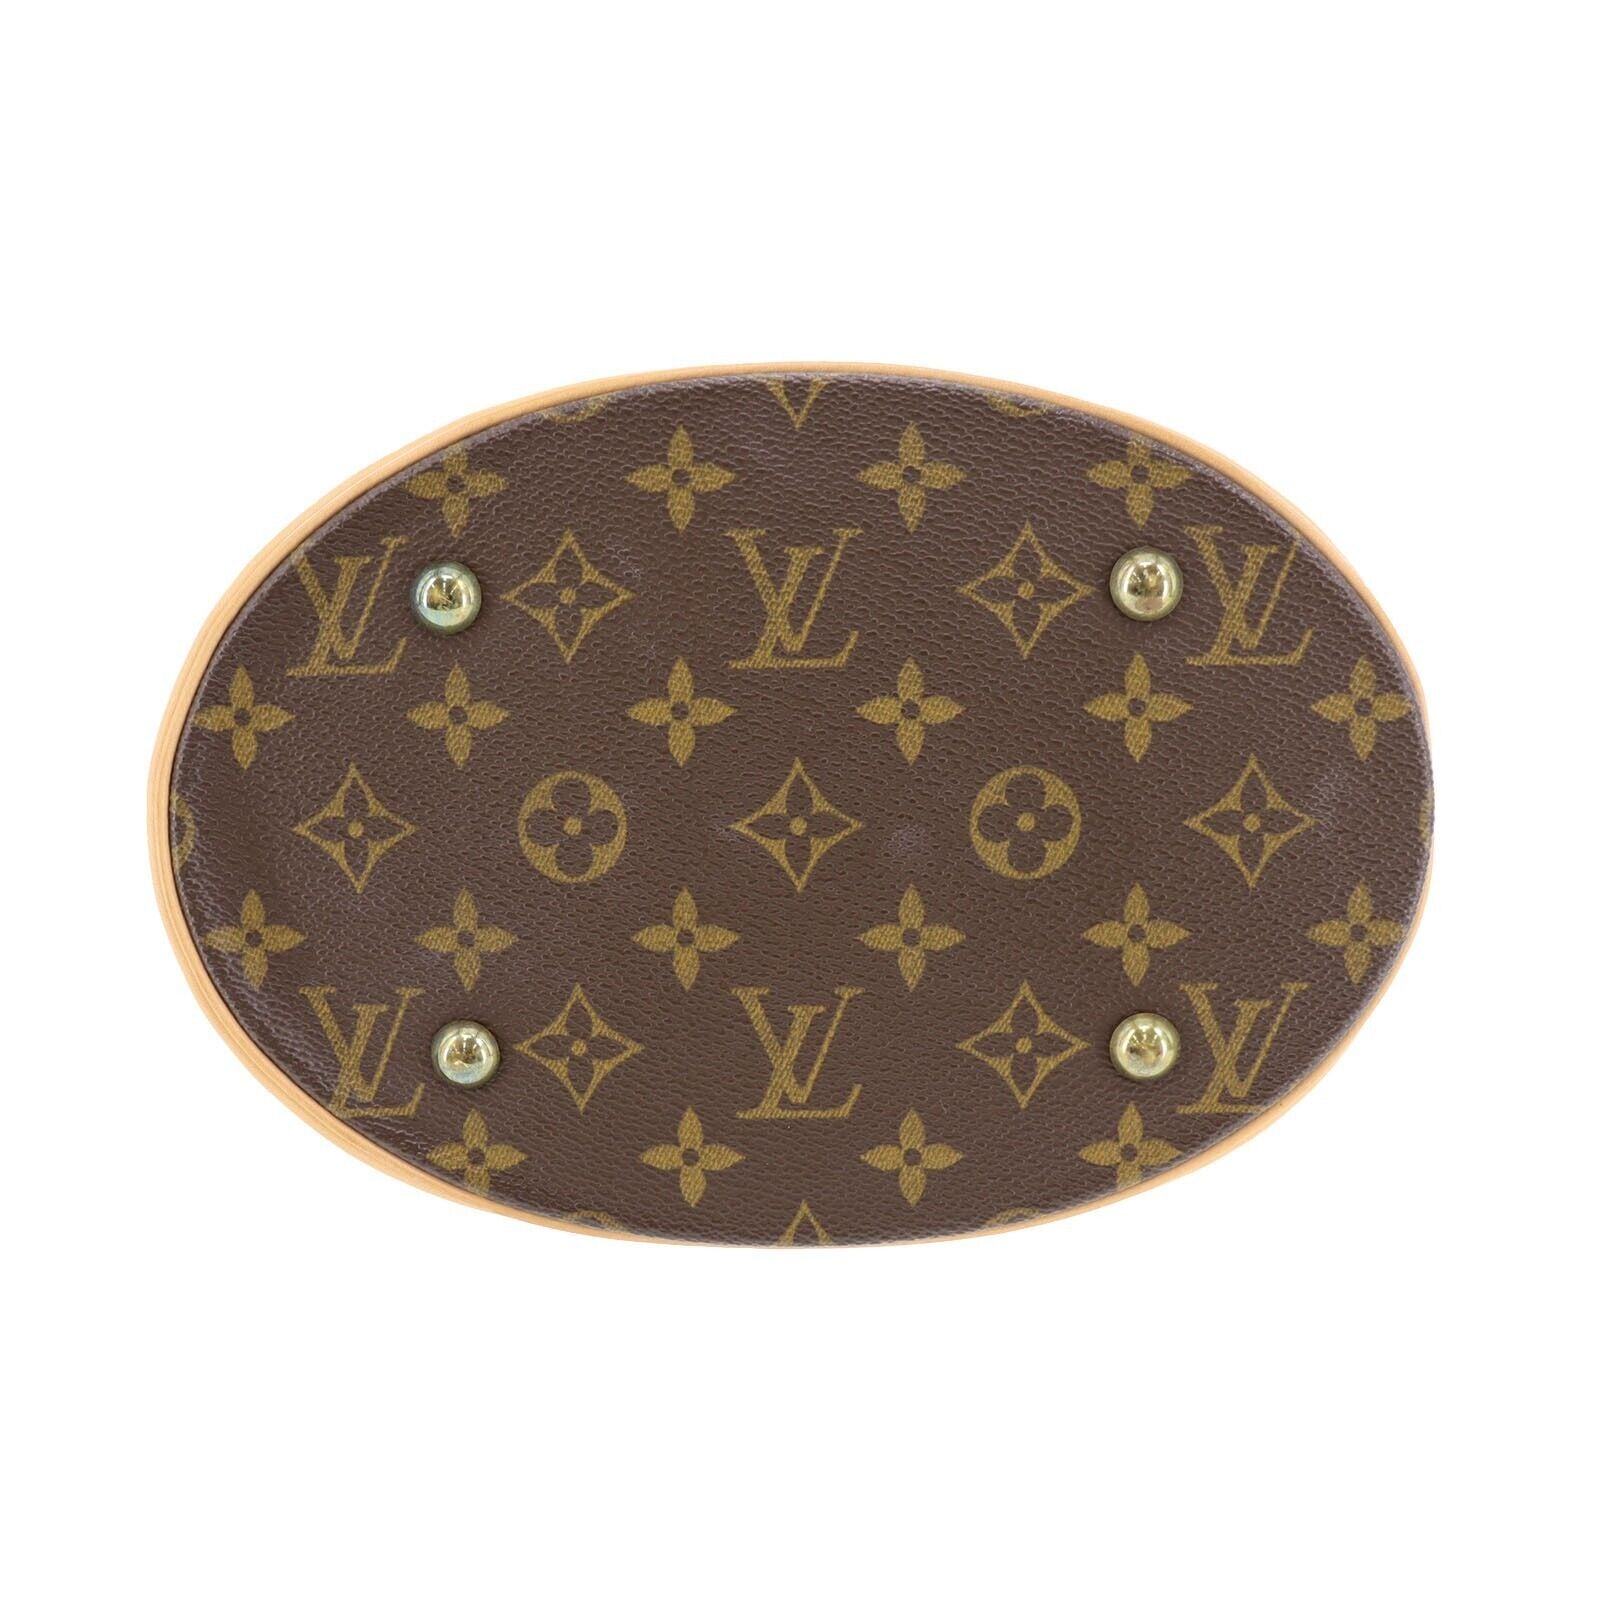 Buy [Used] LOUIS VUITTON Bucket PM Bucket Type Tote Bag with Monogram Pouch  M42238 from Japan - Buy authentic Plus exclusive items from Japan